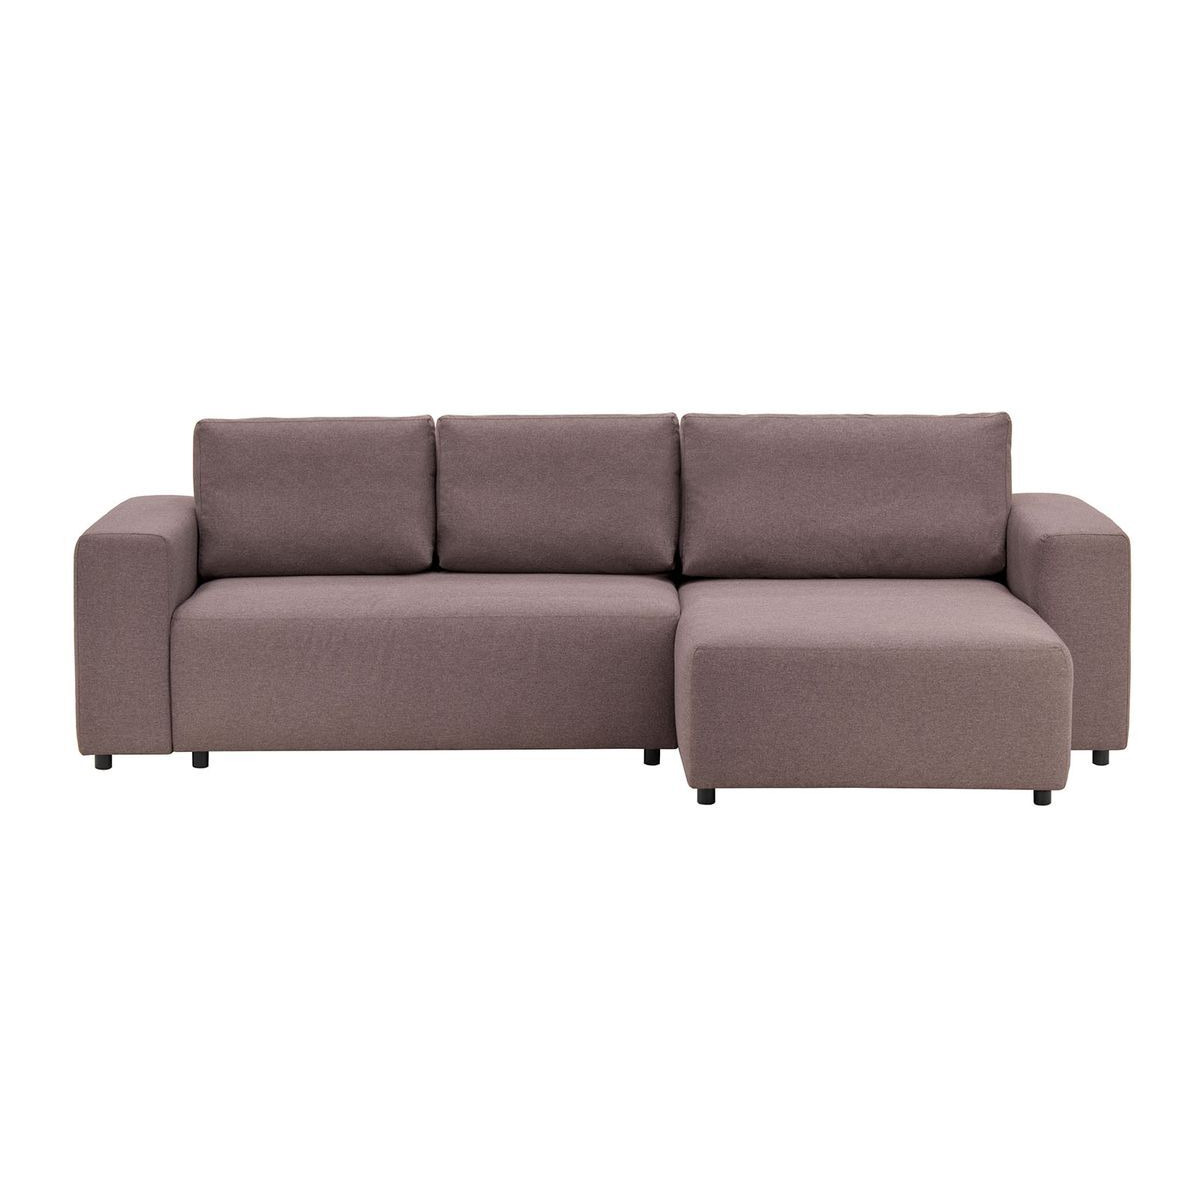 Solace Right Hand Corner Sofa Bed, pink - image 1